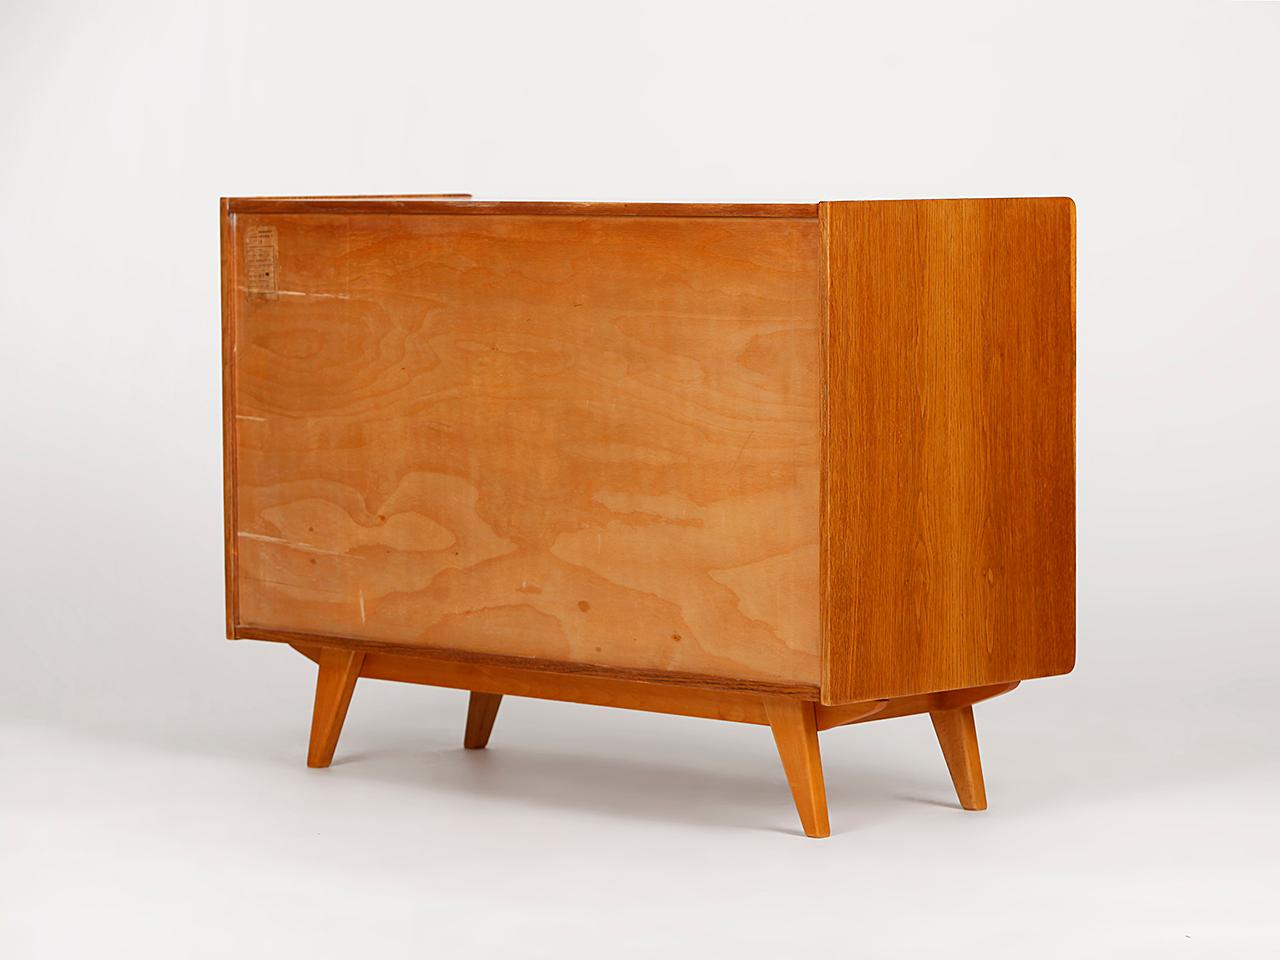 20th Century Sideboard U 453 by Jiri Jiroutek for Interier Praha with Wooden Drawers, 1960s For Sale